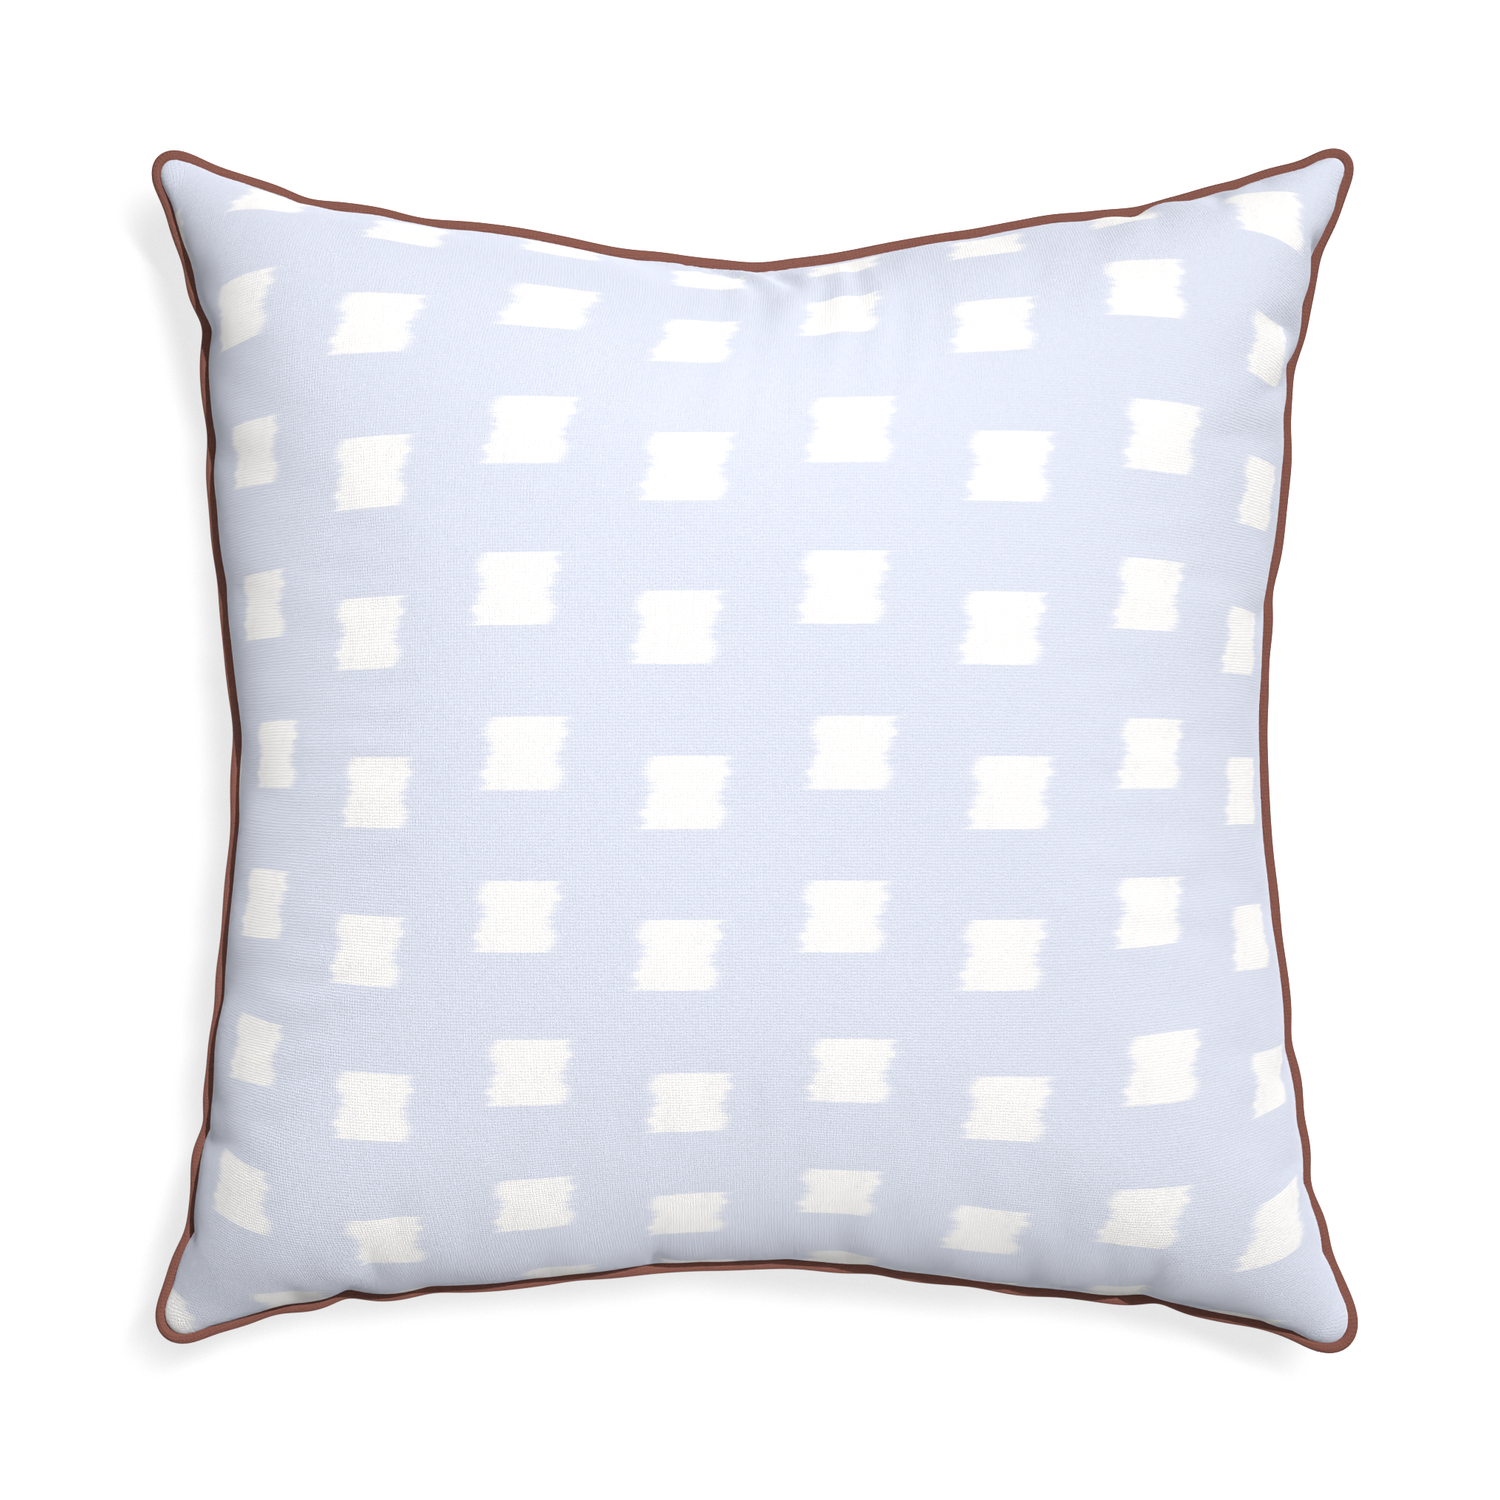 Euro-sham denton custom sky blue patternpillow with w piping on white background